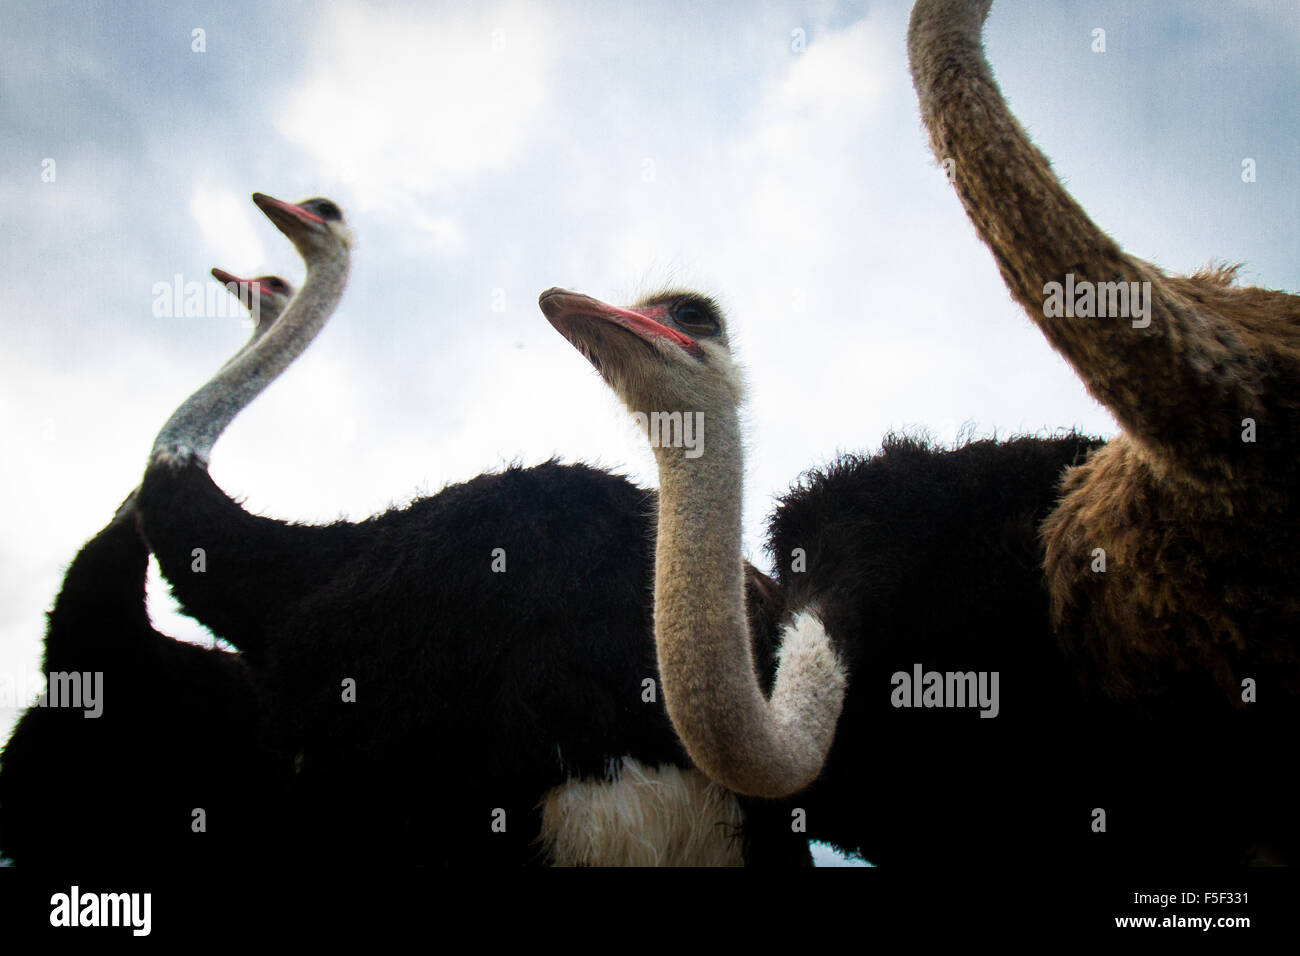 A group of ostriches stretching their necks toward the sky Stock Photo